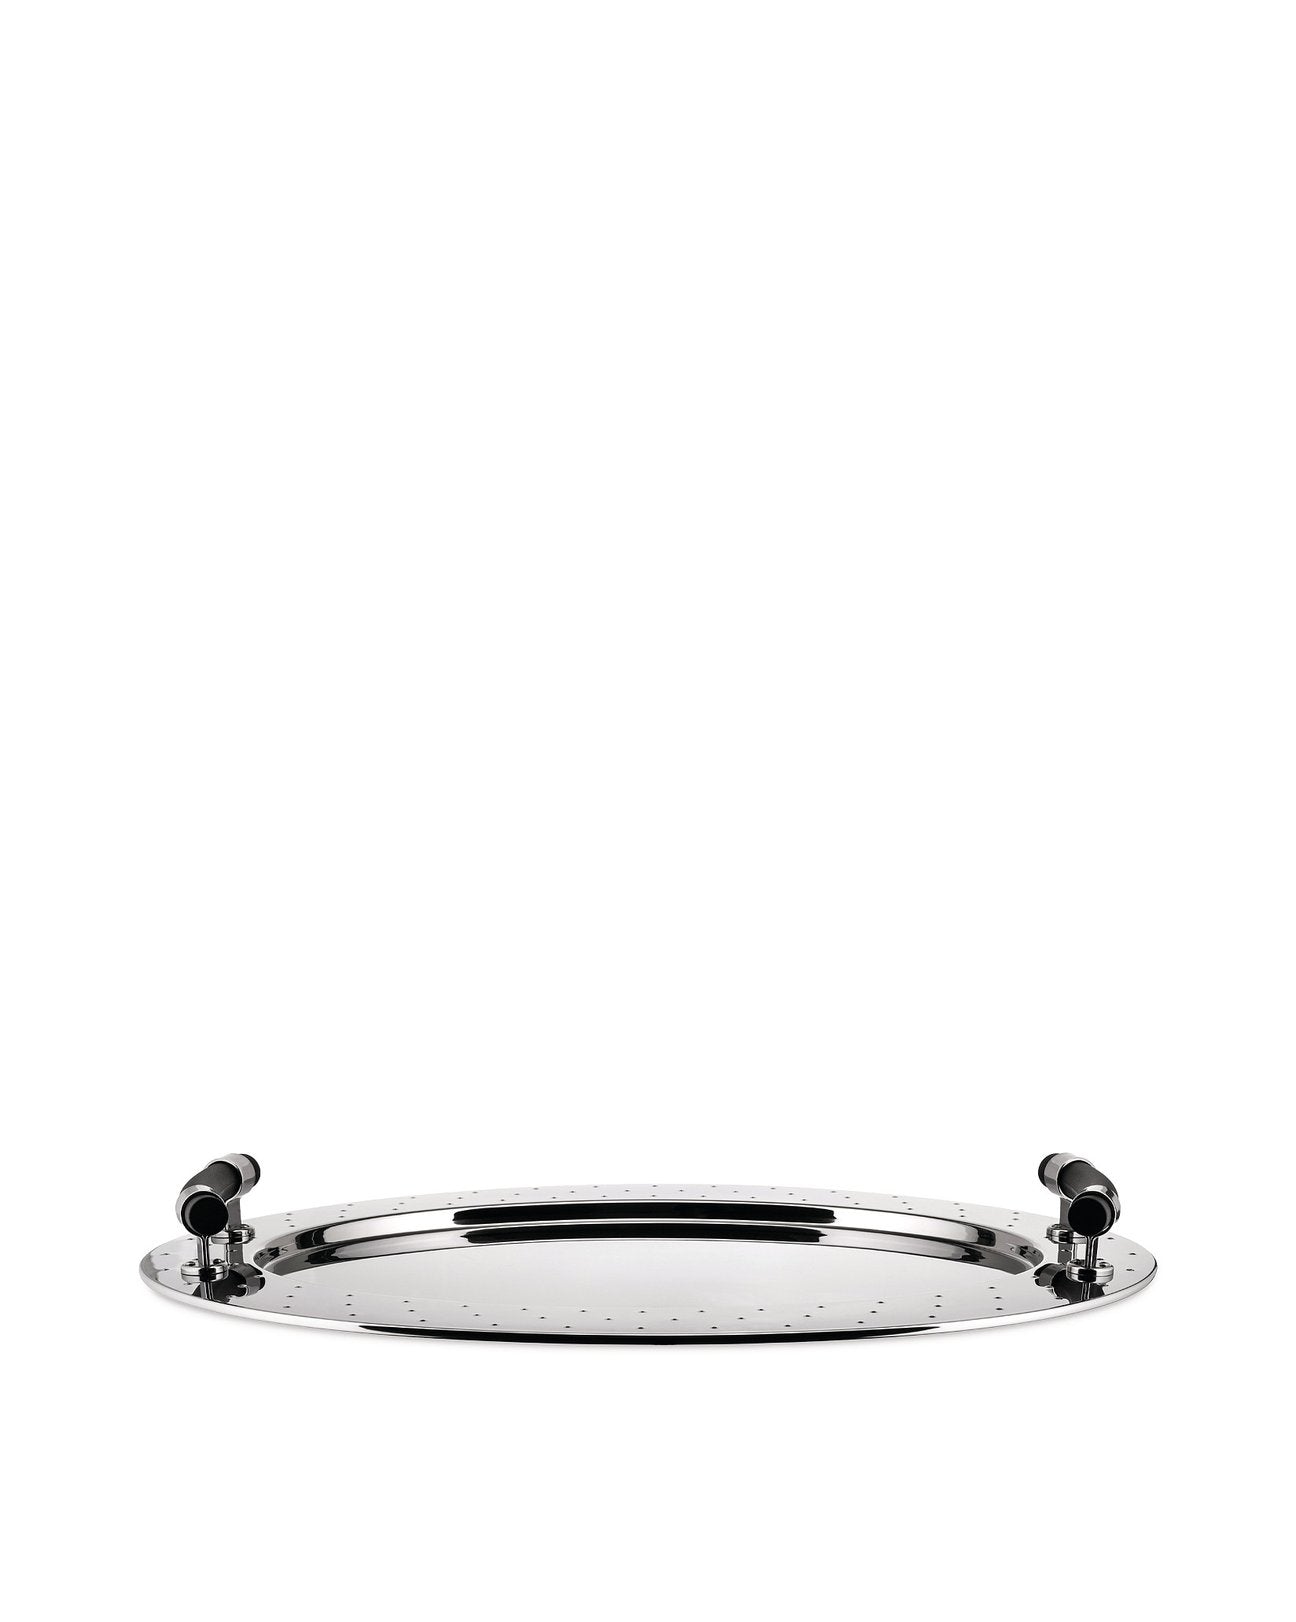 Alessi Oval Tray by Michael Graves | Panik Design